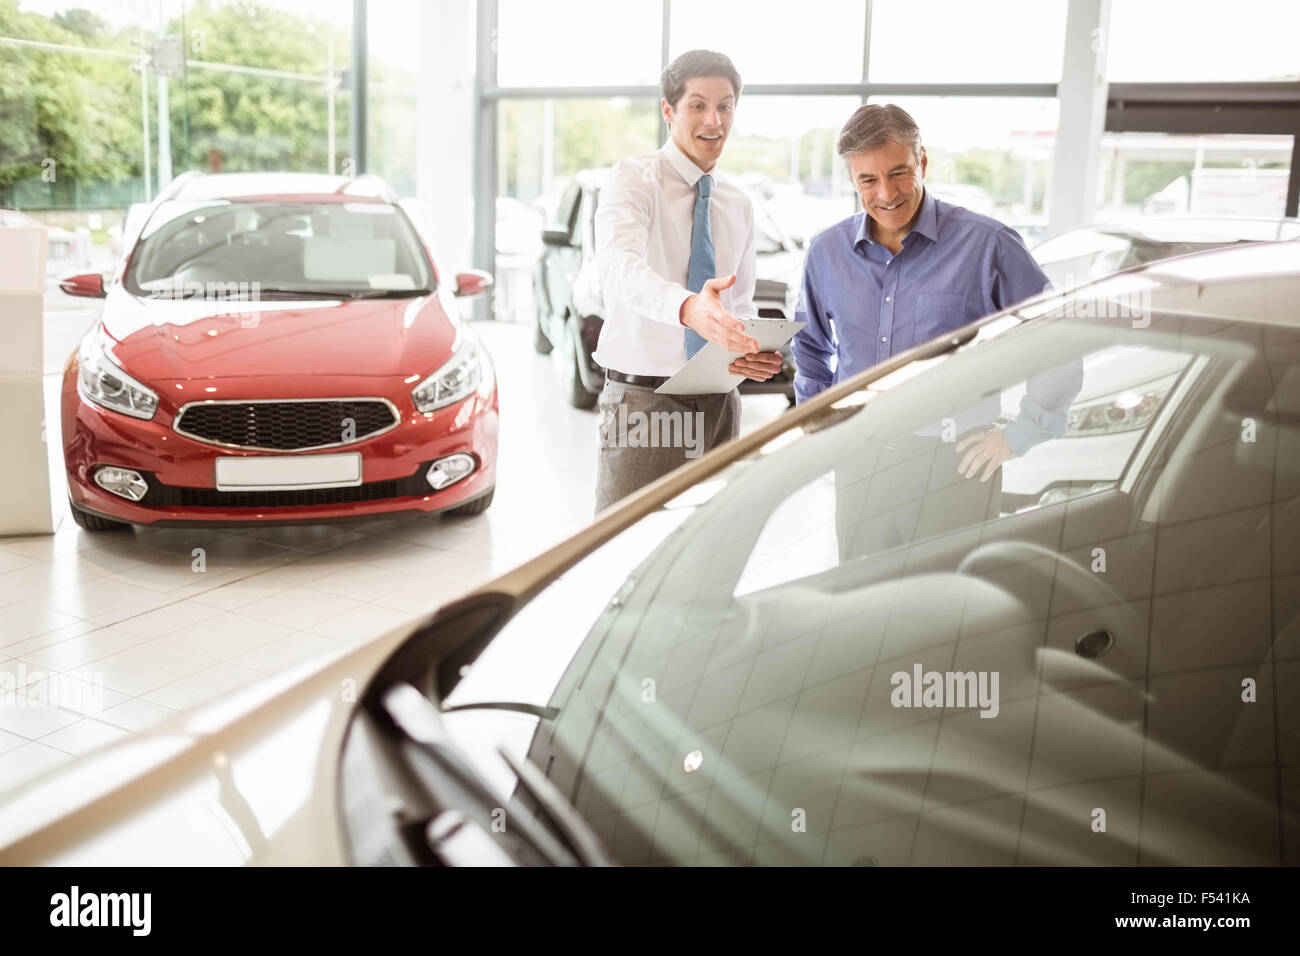 Salesman showing somethings to a man Stock Photo